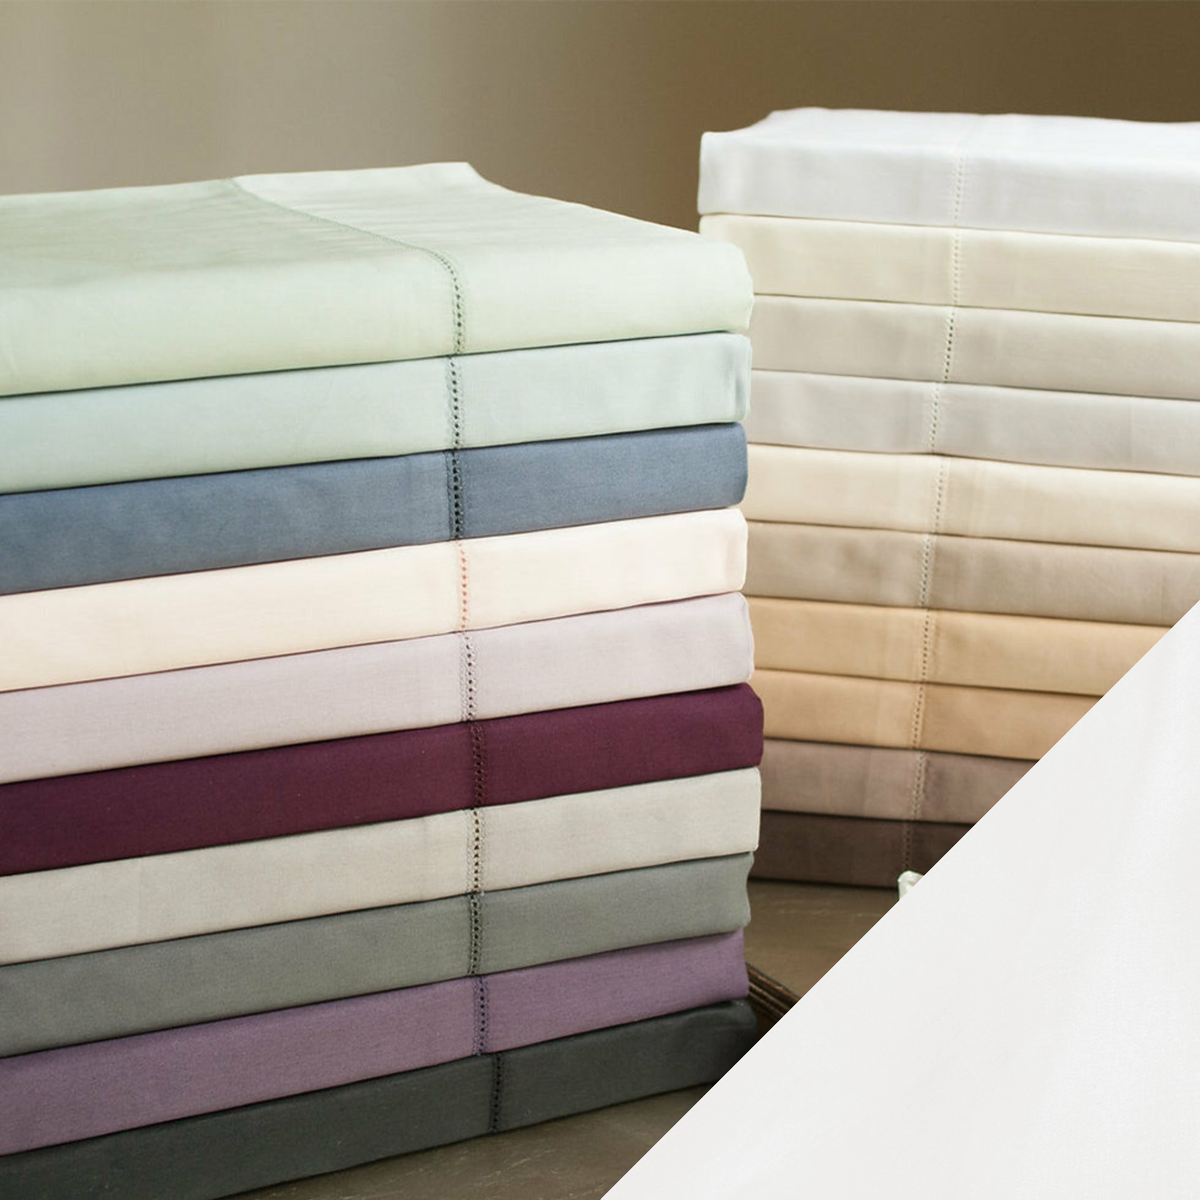 Stack of Home Treasures Royal Sateen Bedding with Natural White Color Swatch